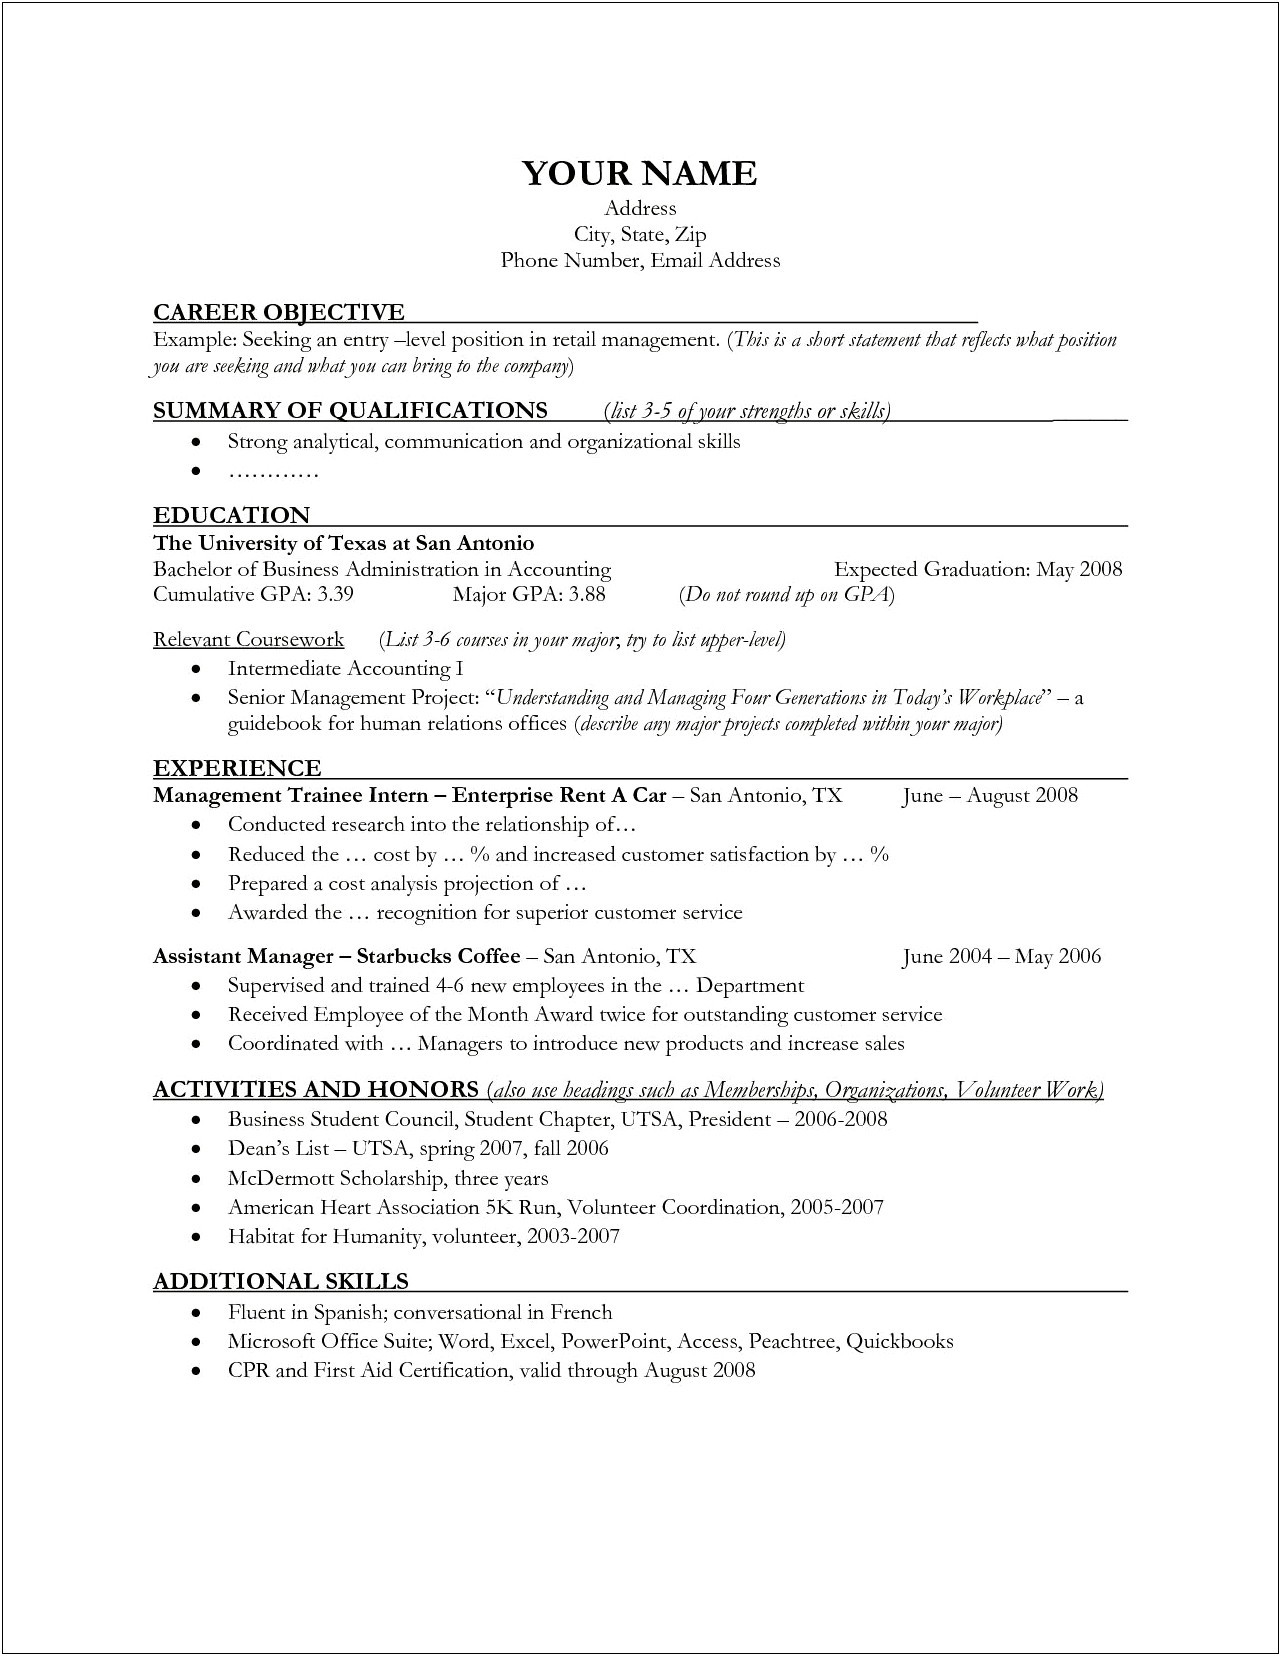 Sample Of Resumes For Manager Positions